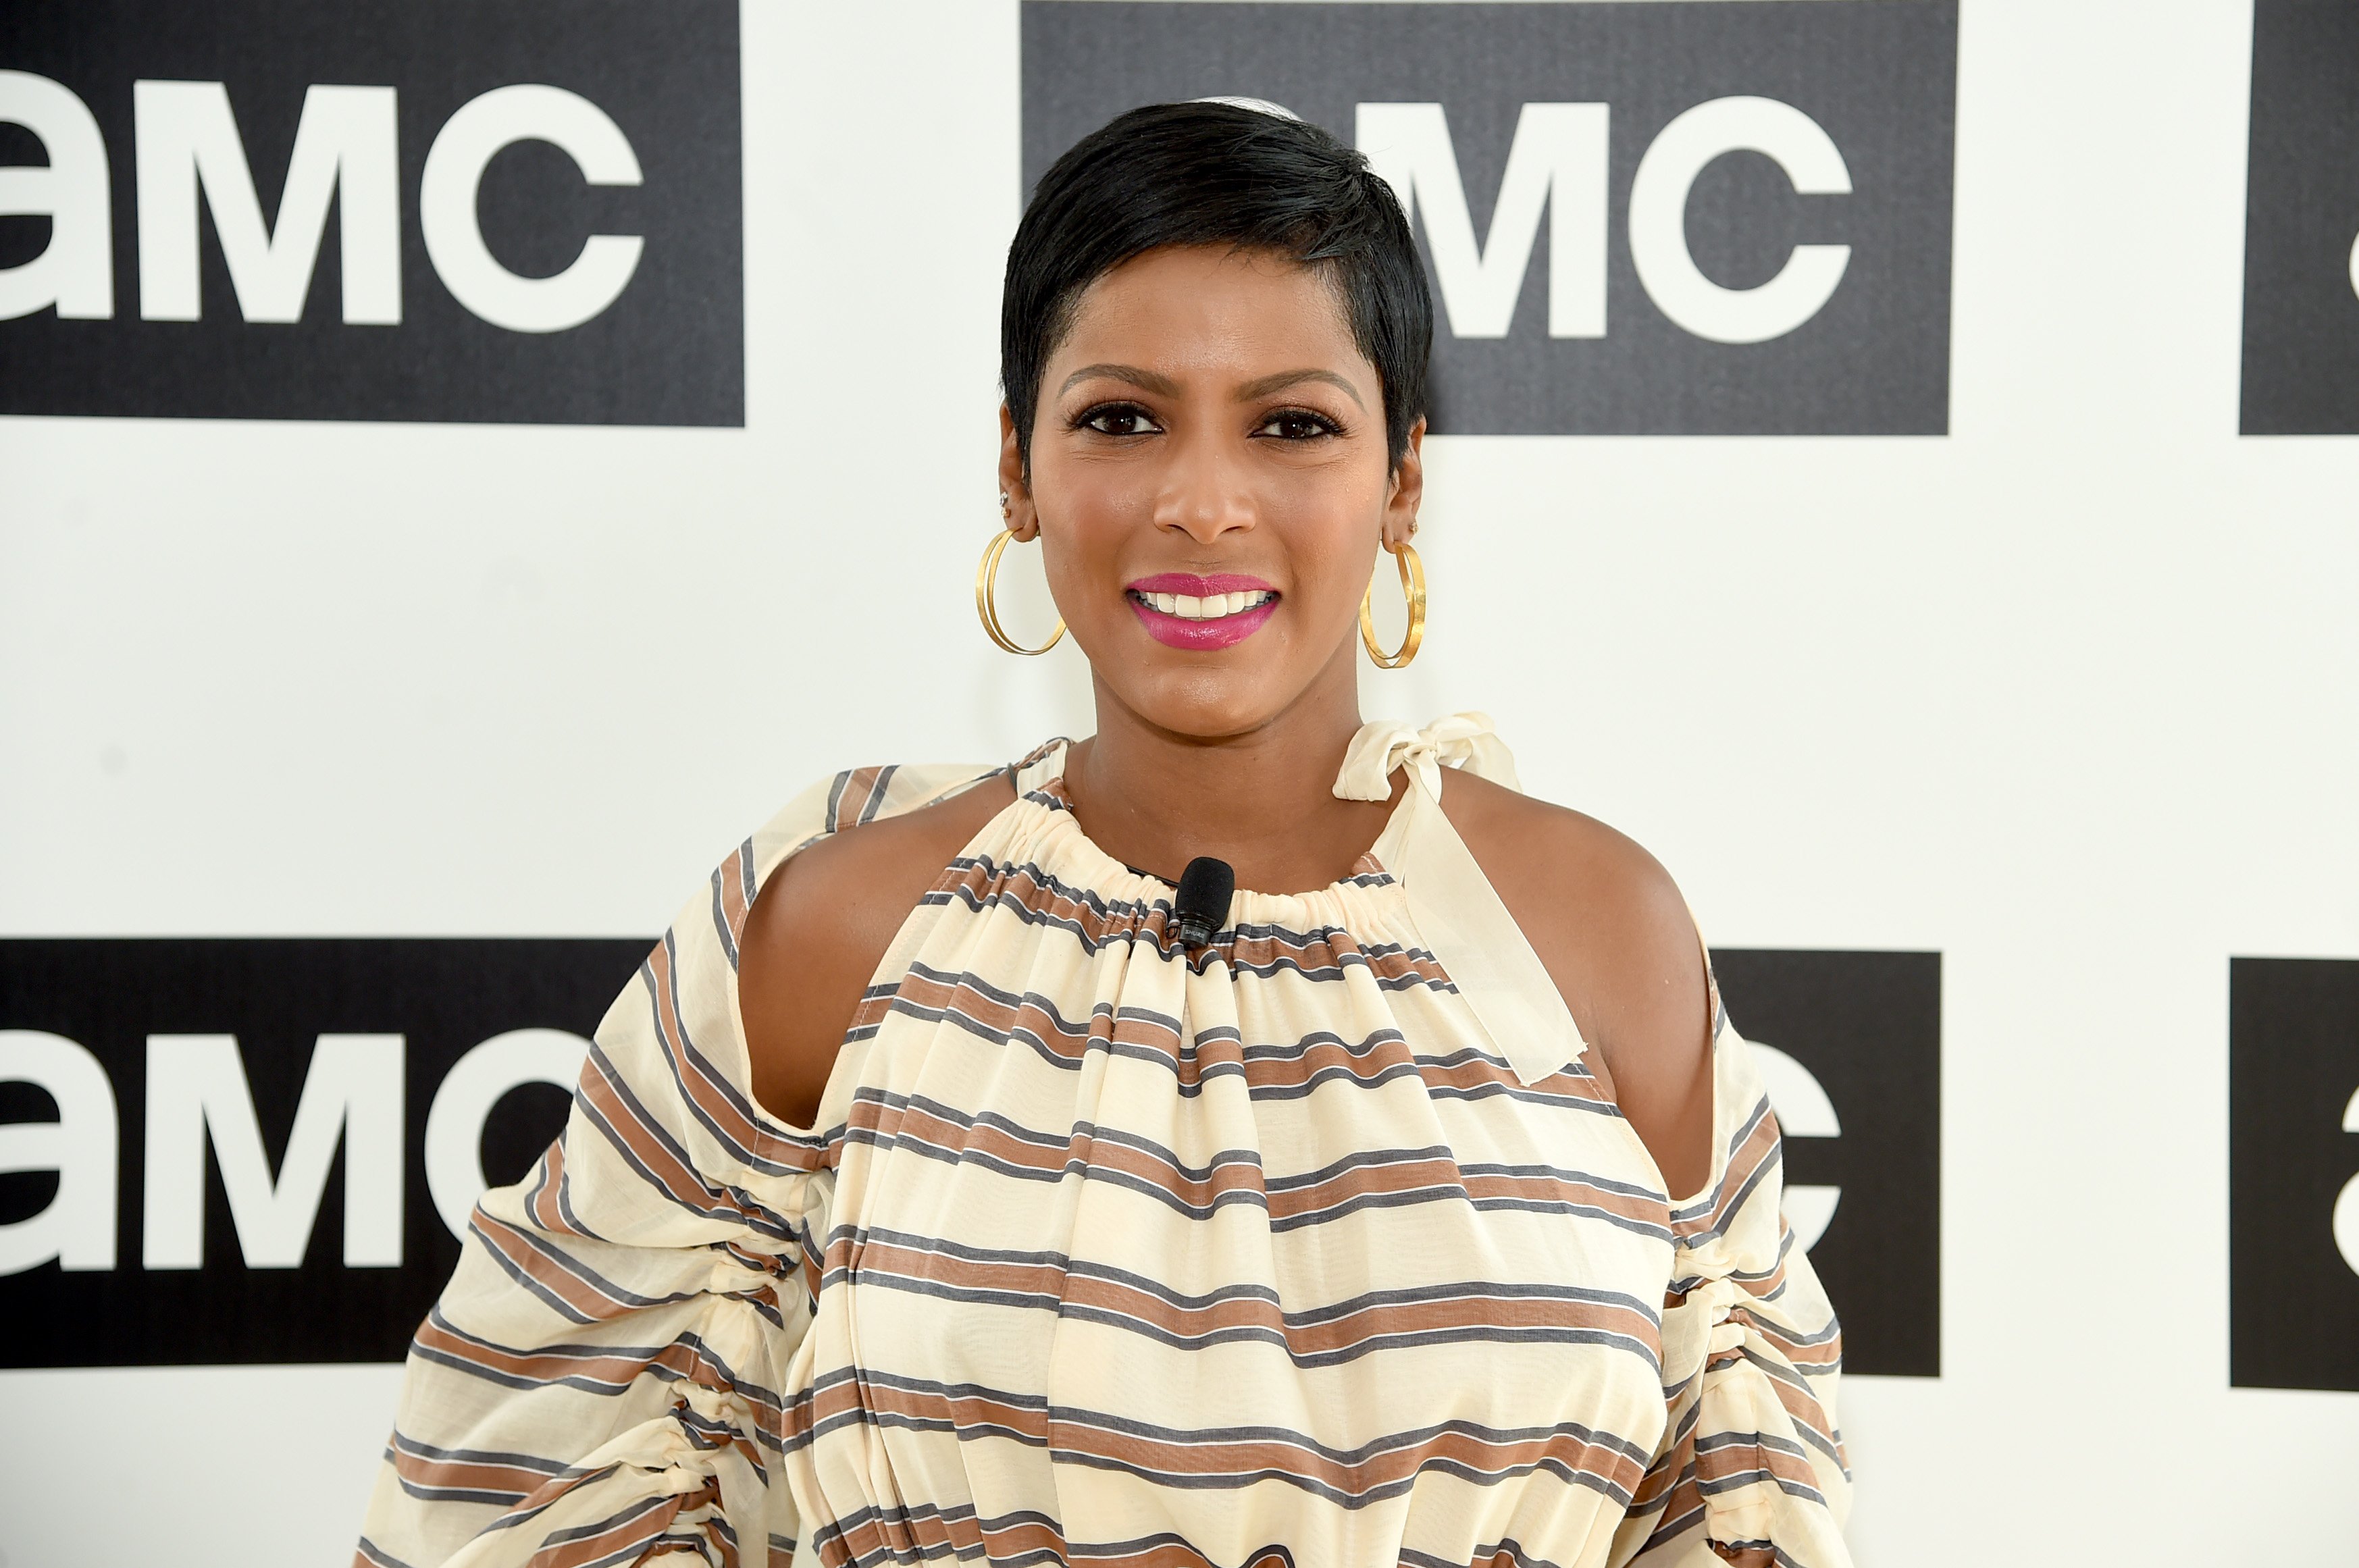 Tamron Hall attends the AMC Summit in New York City on June 20, 2018 | Photo: Getty Images